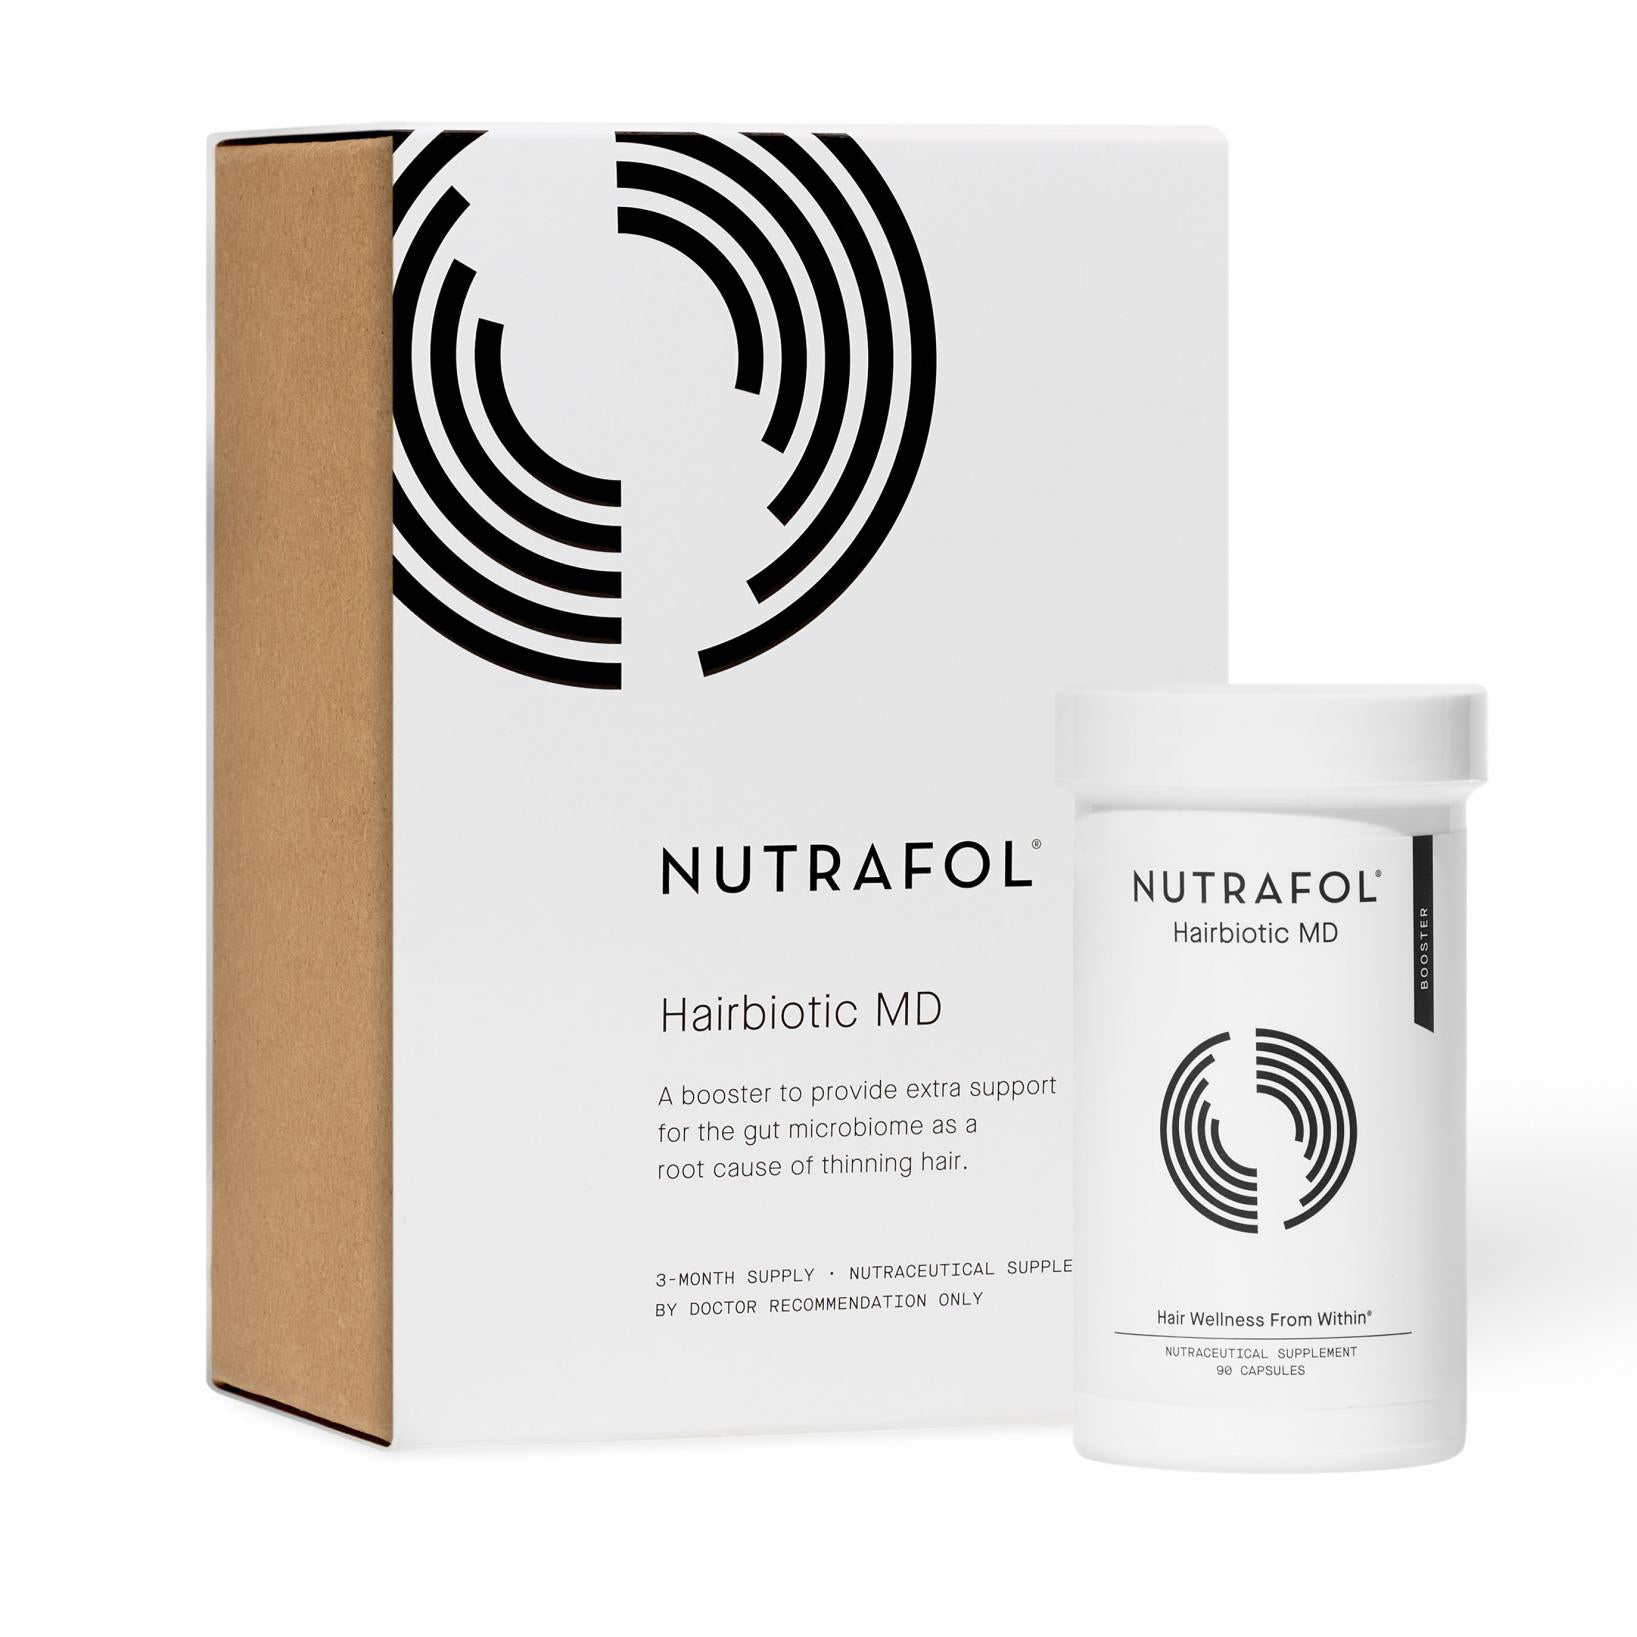 Nutrafol Hairbiotic MD - 3 month supply